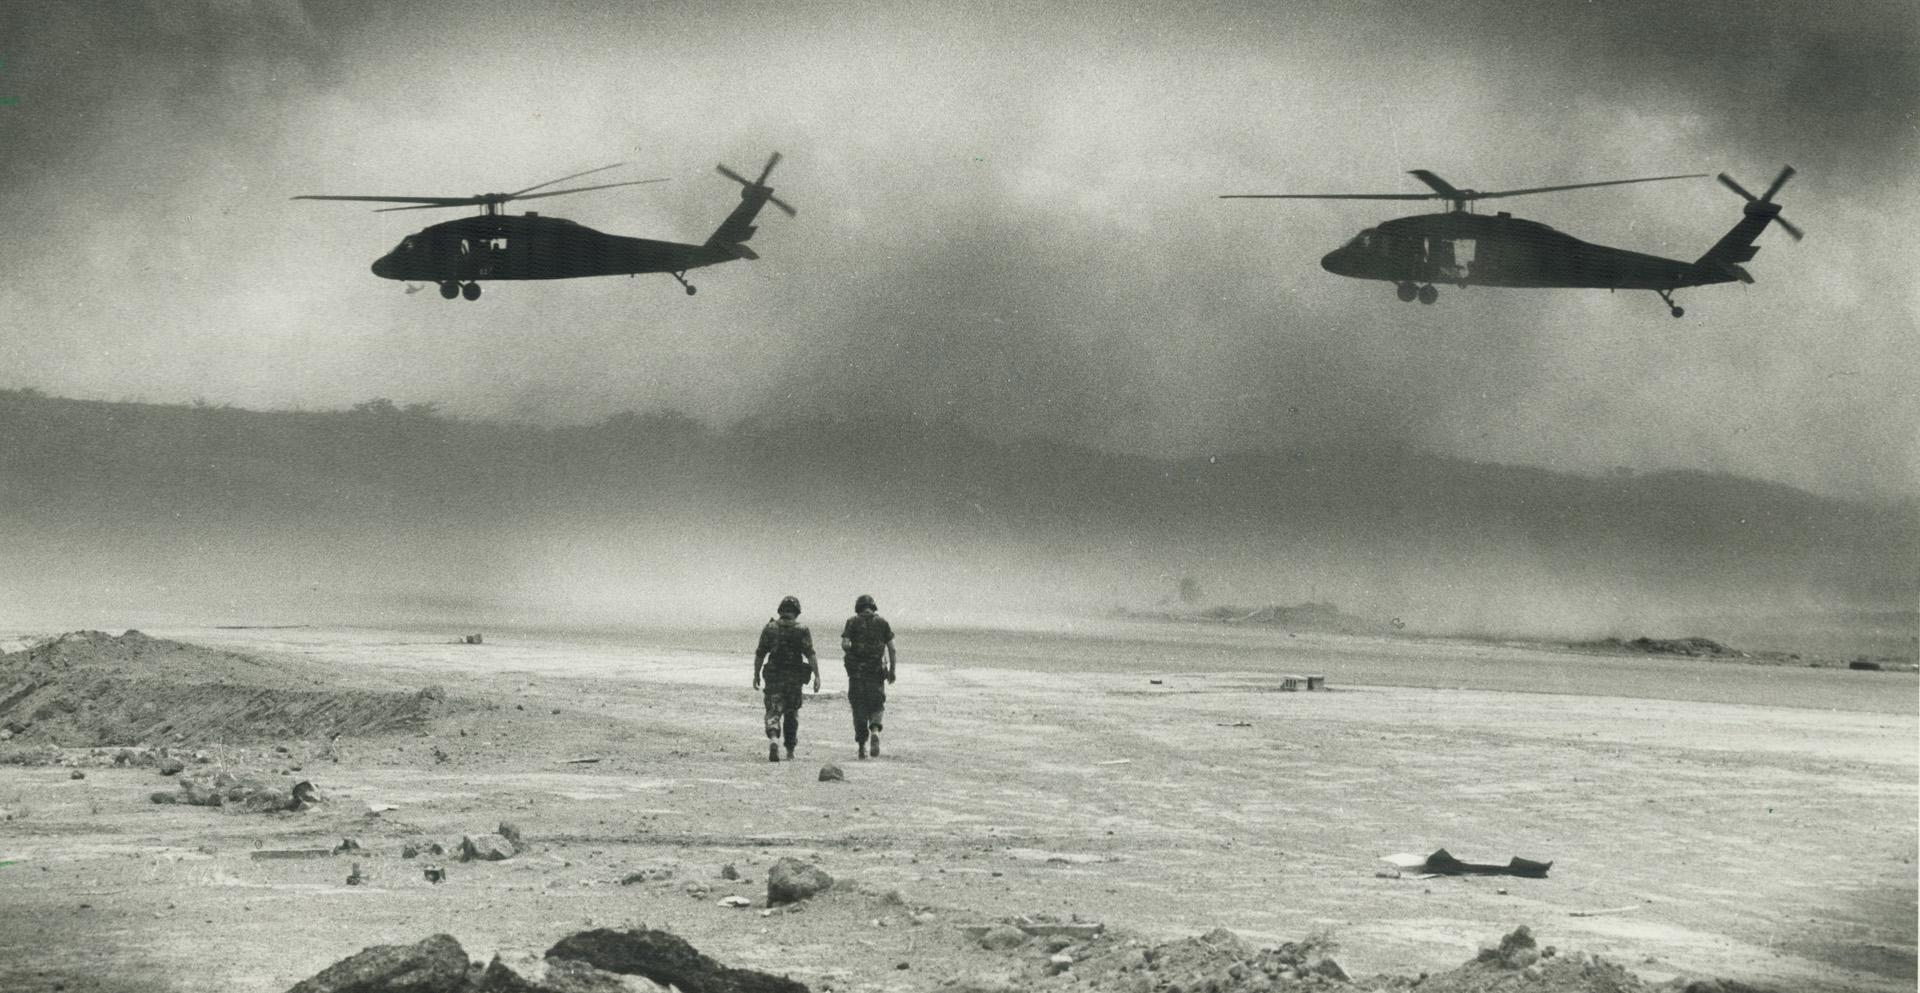 Grenada scene: Helicopters approach a landing strip while soldiers walk along beach